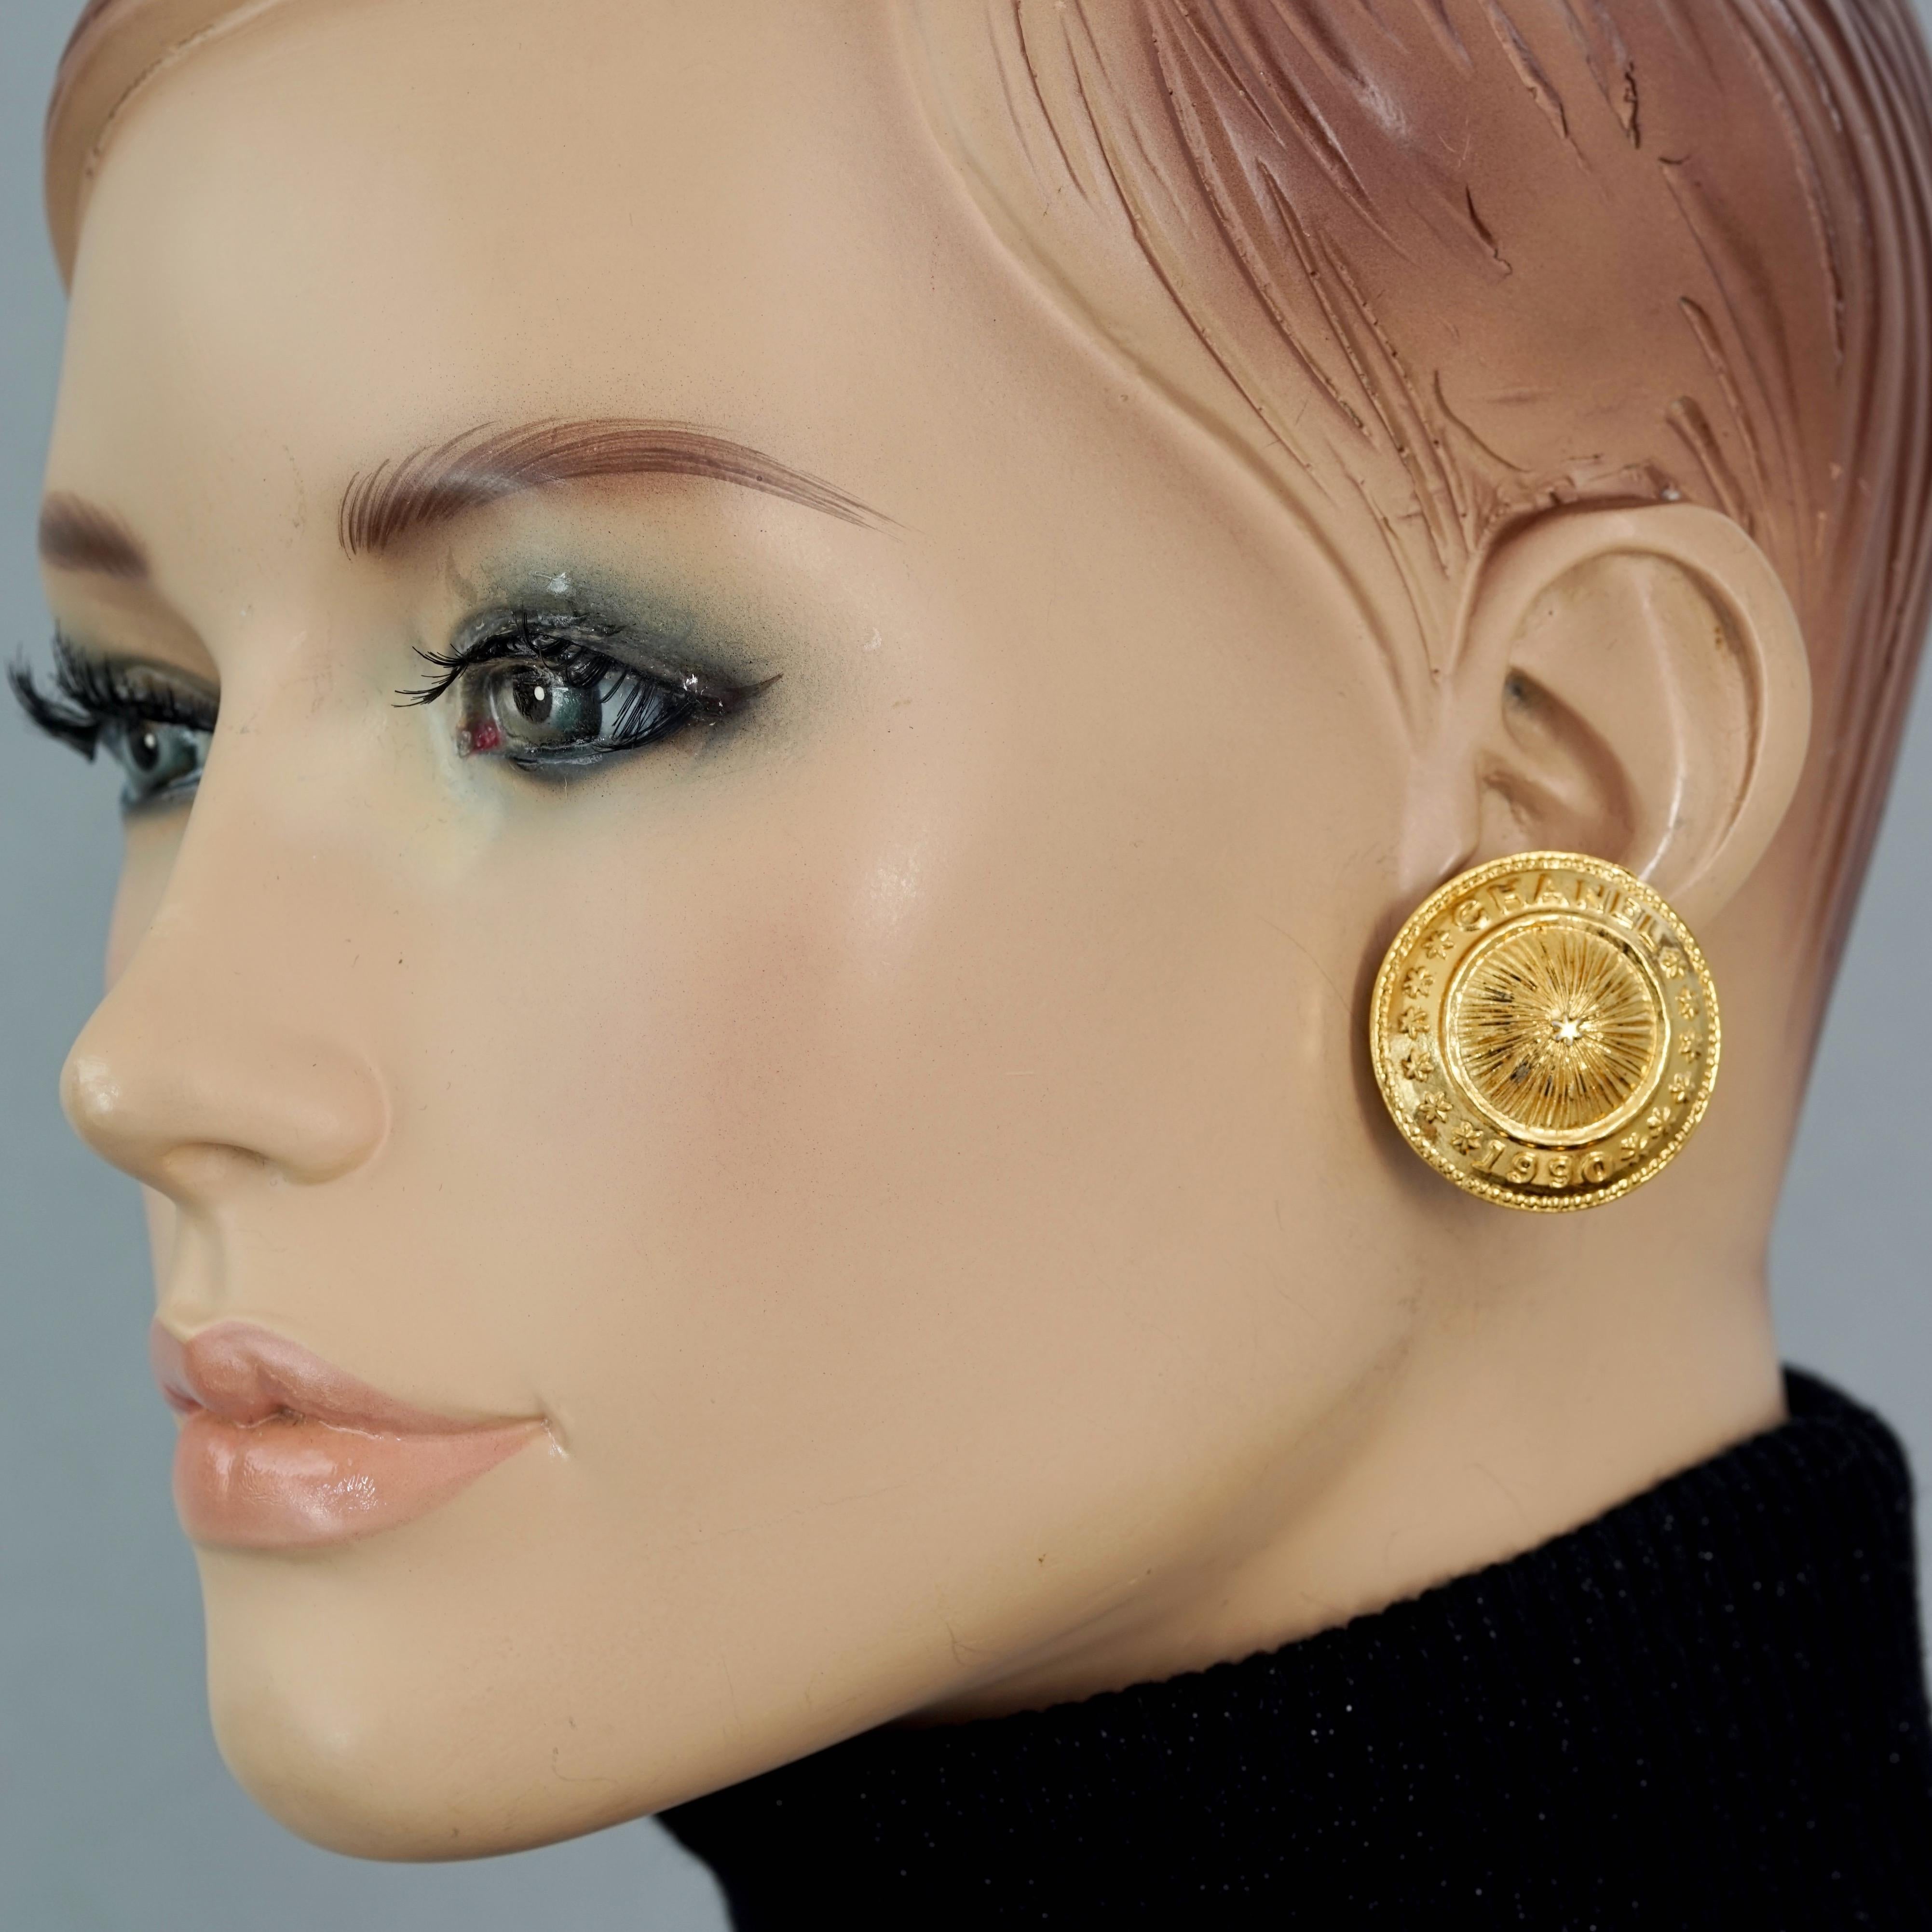 Vintage 1990 CHANEL Logo Sunburst Medallion Disc Earrings

Measurements:
Height: 1.22 inches (3.1 cm)
Width: 1.22 inches (3.1 cm)
Weight per Earring: 11 gram

Features:
- 100% Authentic CHANEL.
- Medallion/ Disc/ Coin earrings with embossed CHANEL